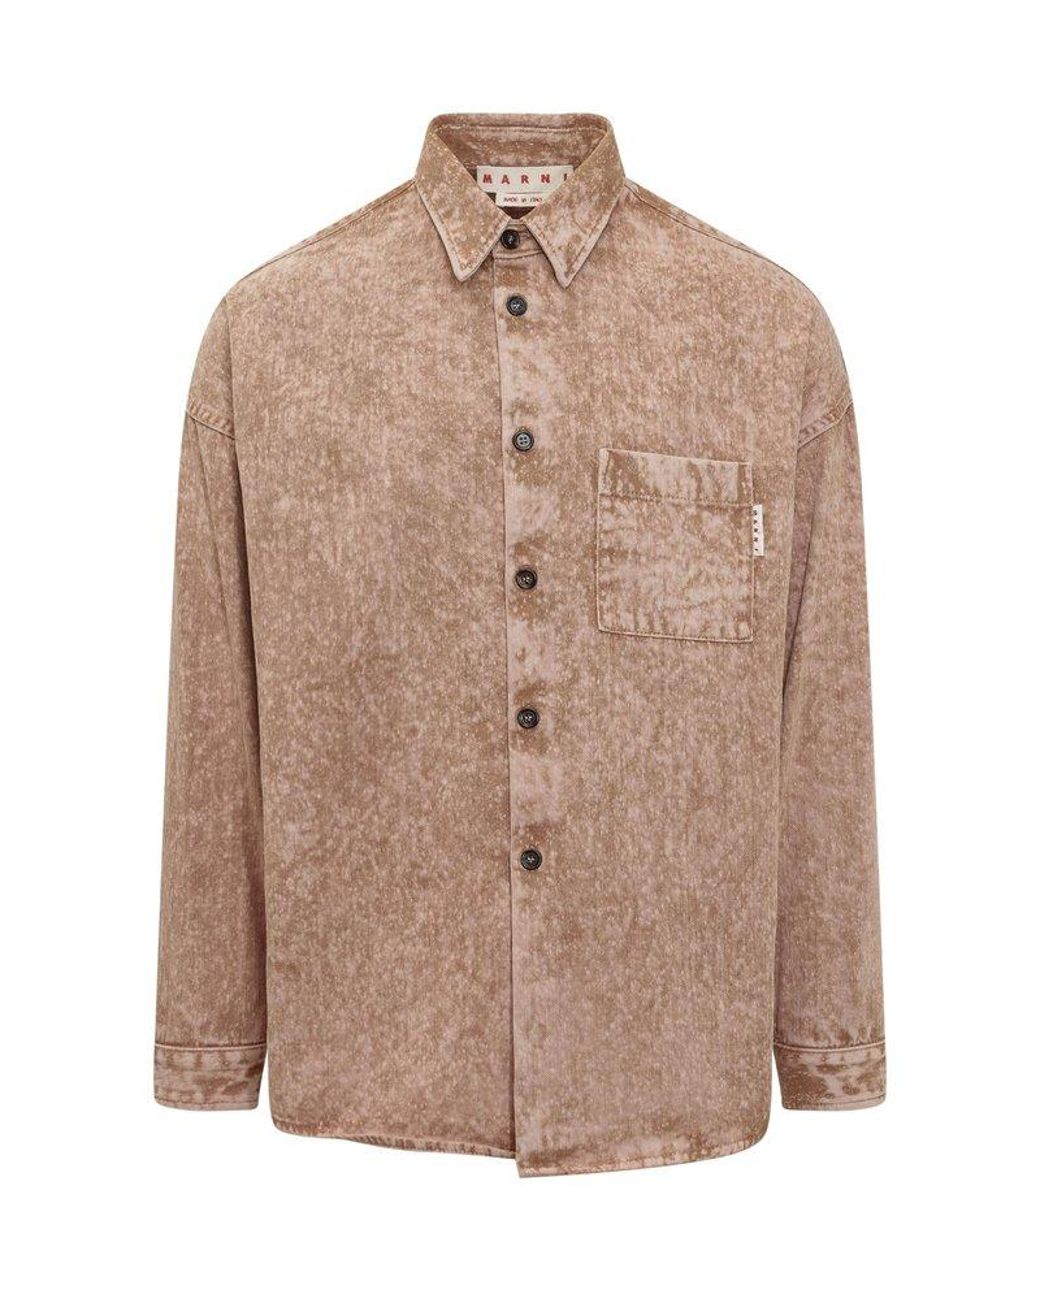 Marni Shirt in Brown for Men | Lyst